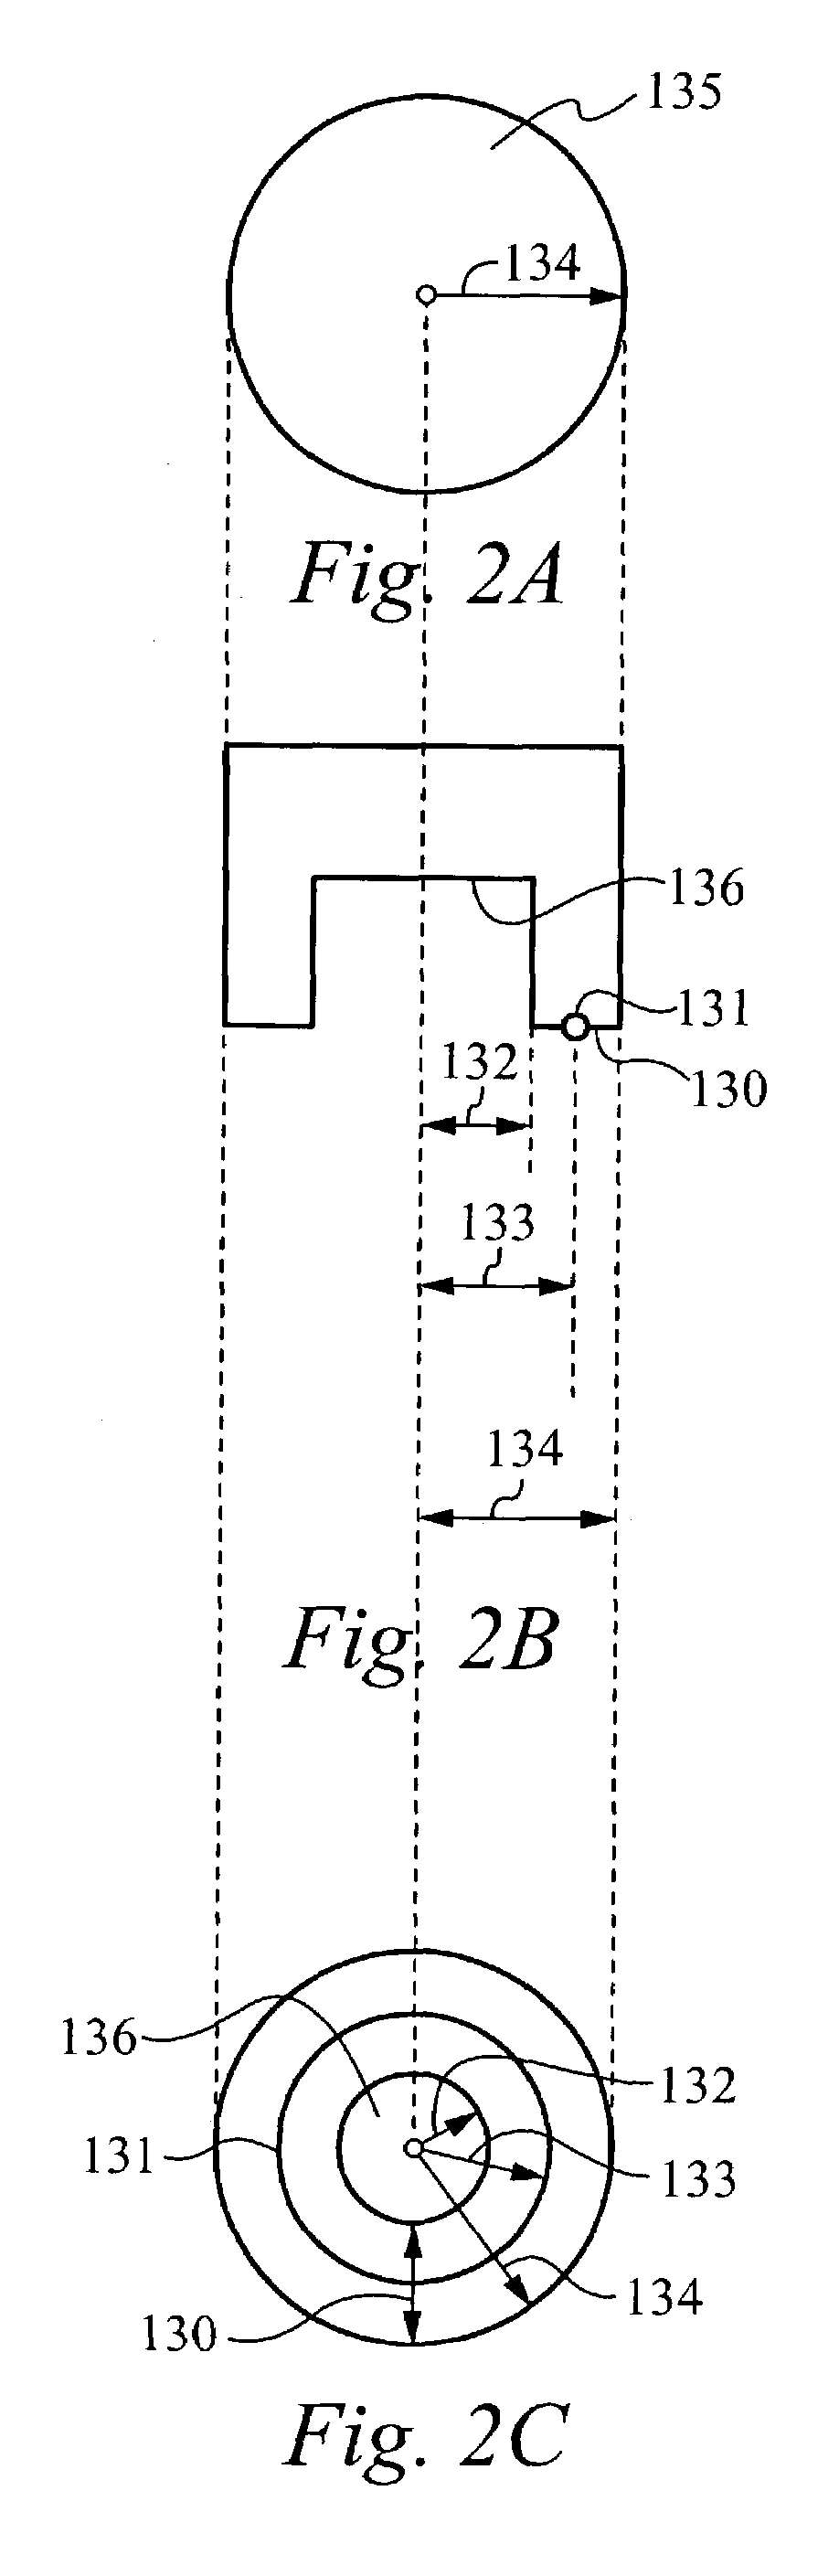 High-pressure processing chamber for a semiconductor wafer